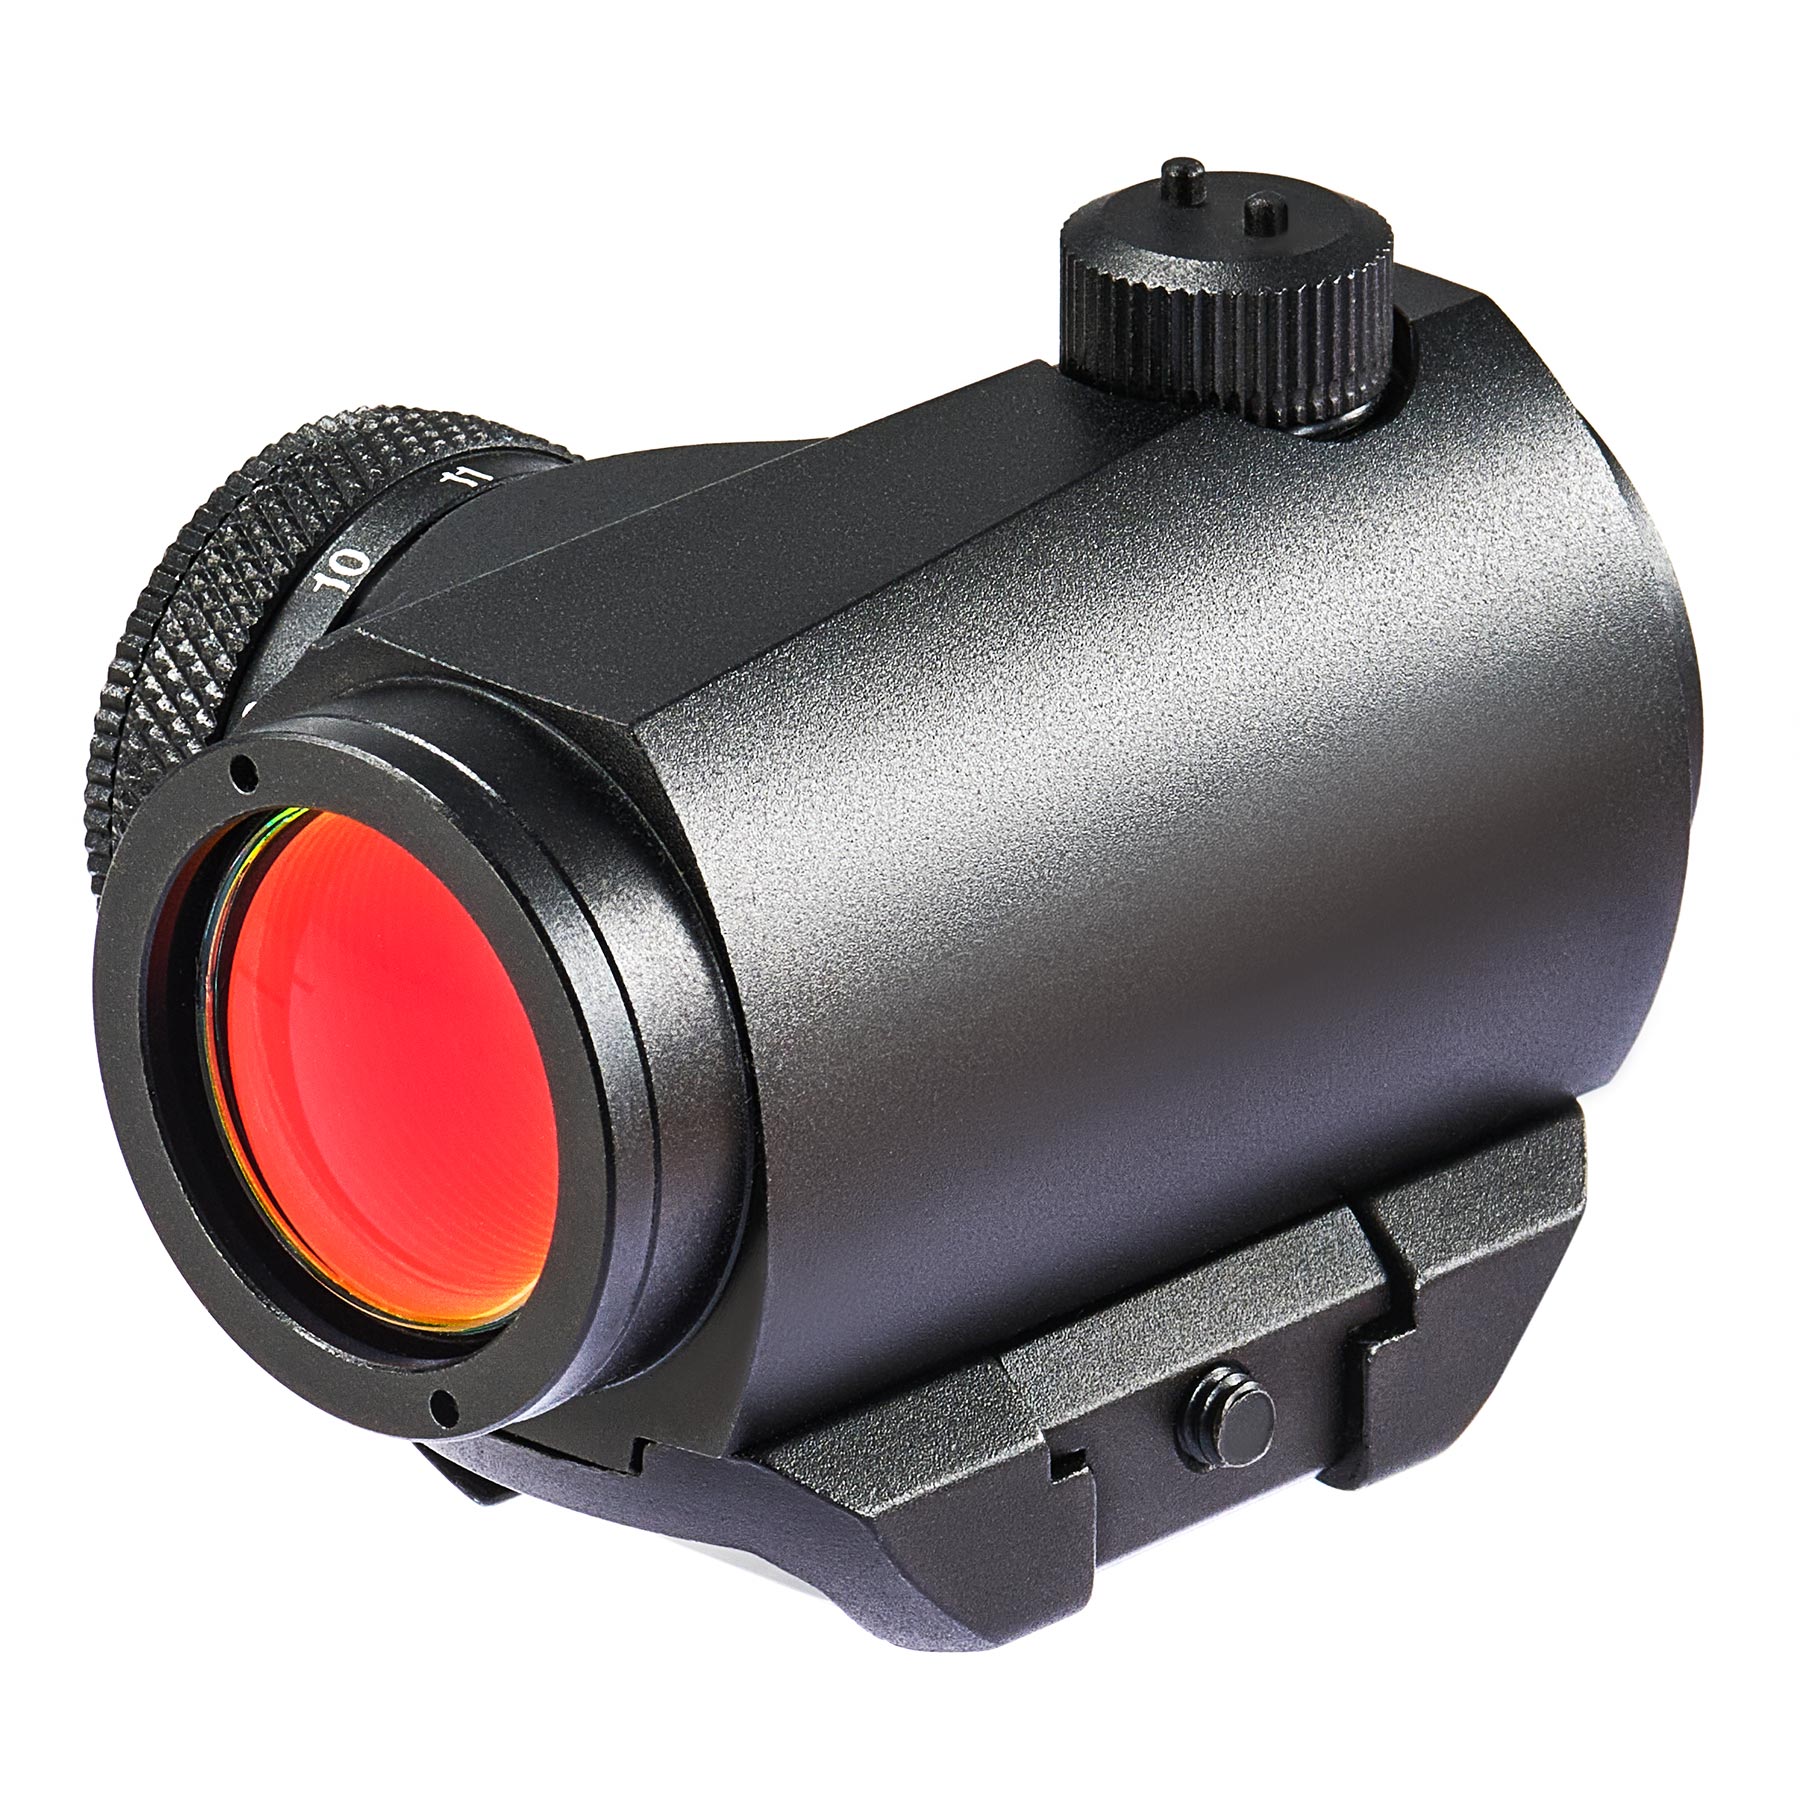 Red-Dot-Scope-for-20mm-Picatinny-and-Weaver-Rails-1x22-Tactical-Reflex-Sight-with-11-Brightness-Levels-Tactical-Hunting-Rifle-Accessory-for-Pistols-Pellet-BB-Airsoft-Guns-More-Battery